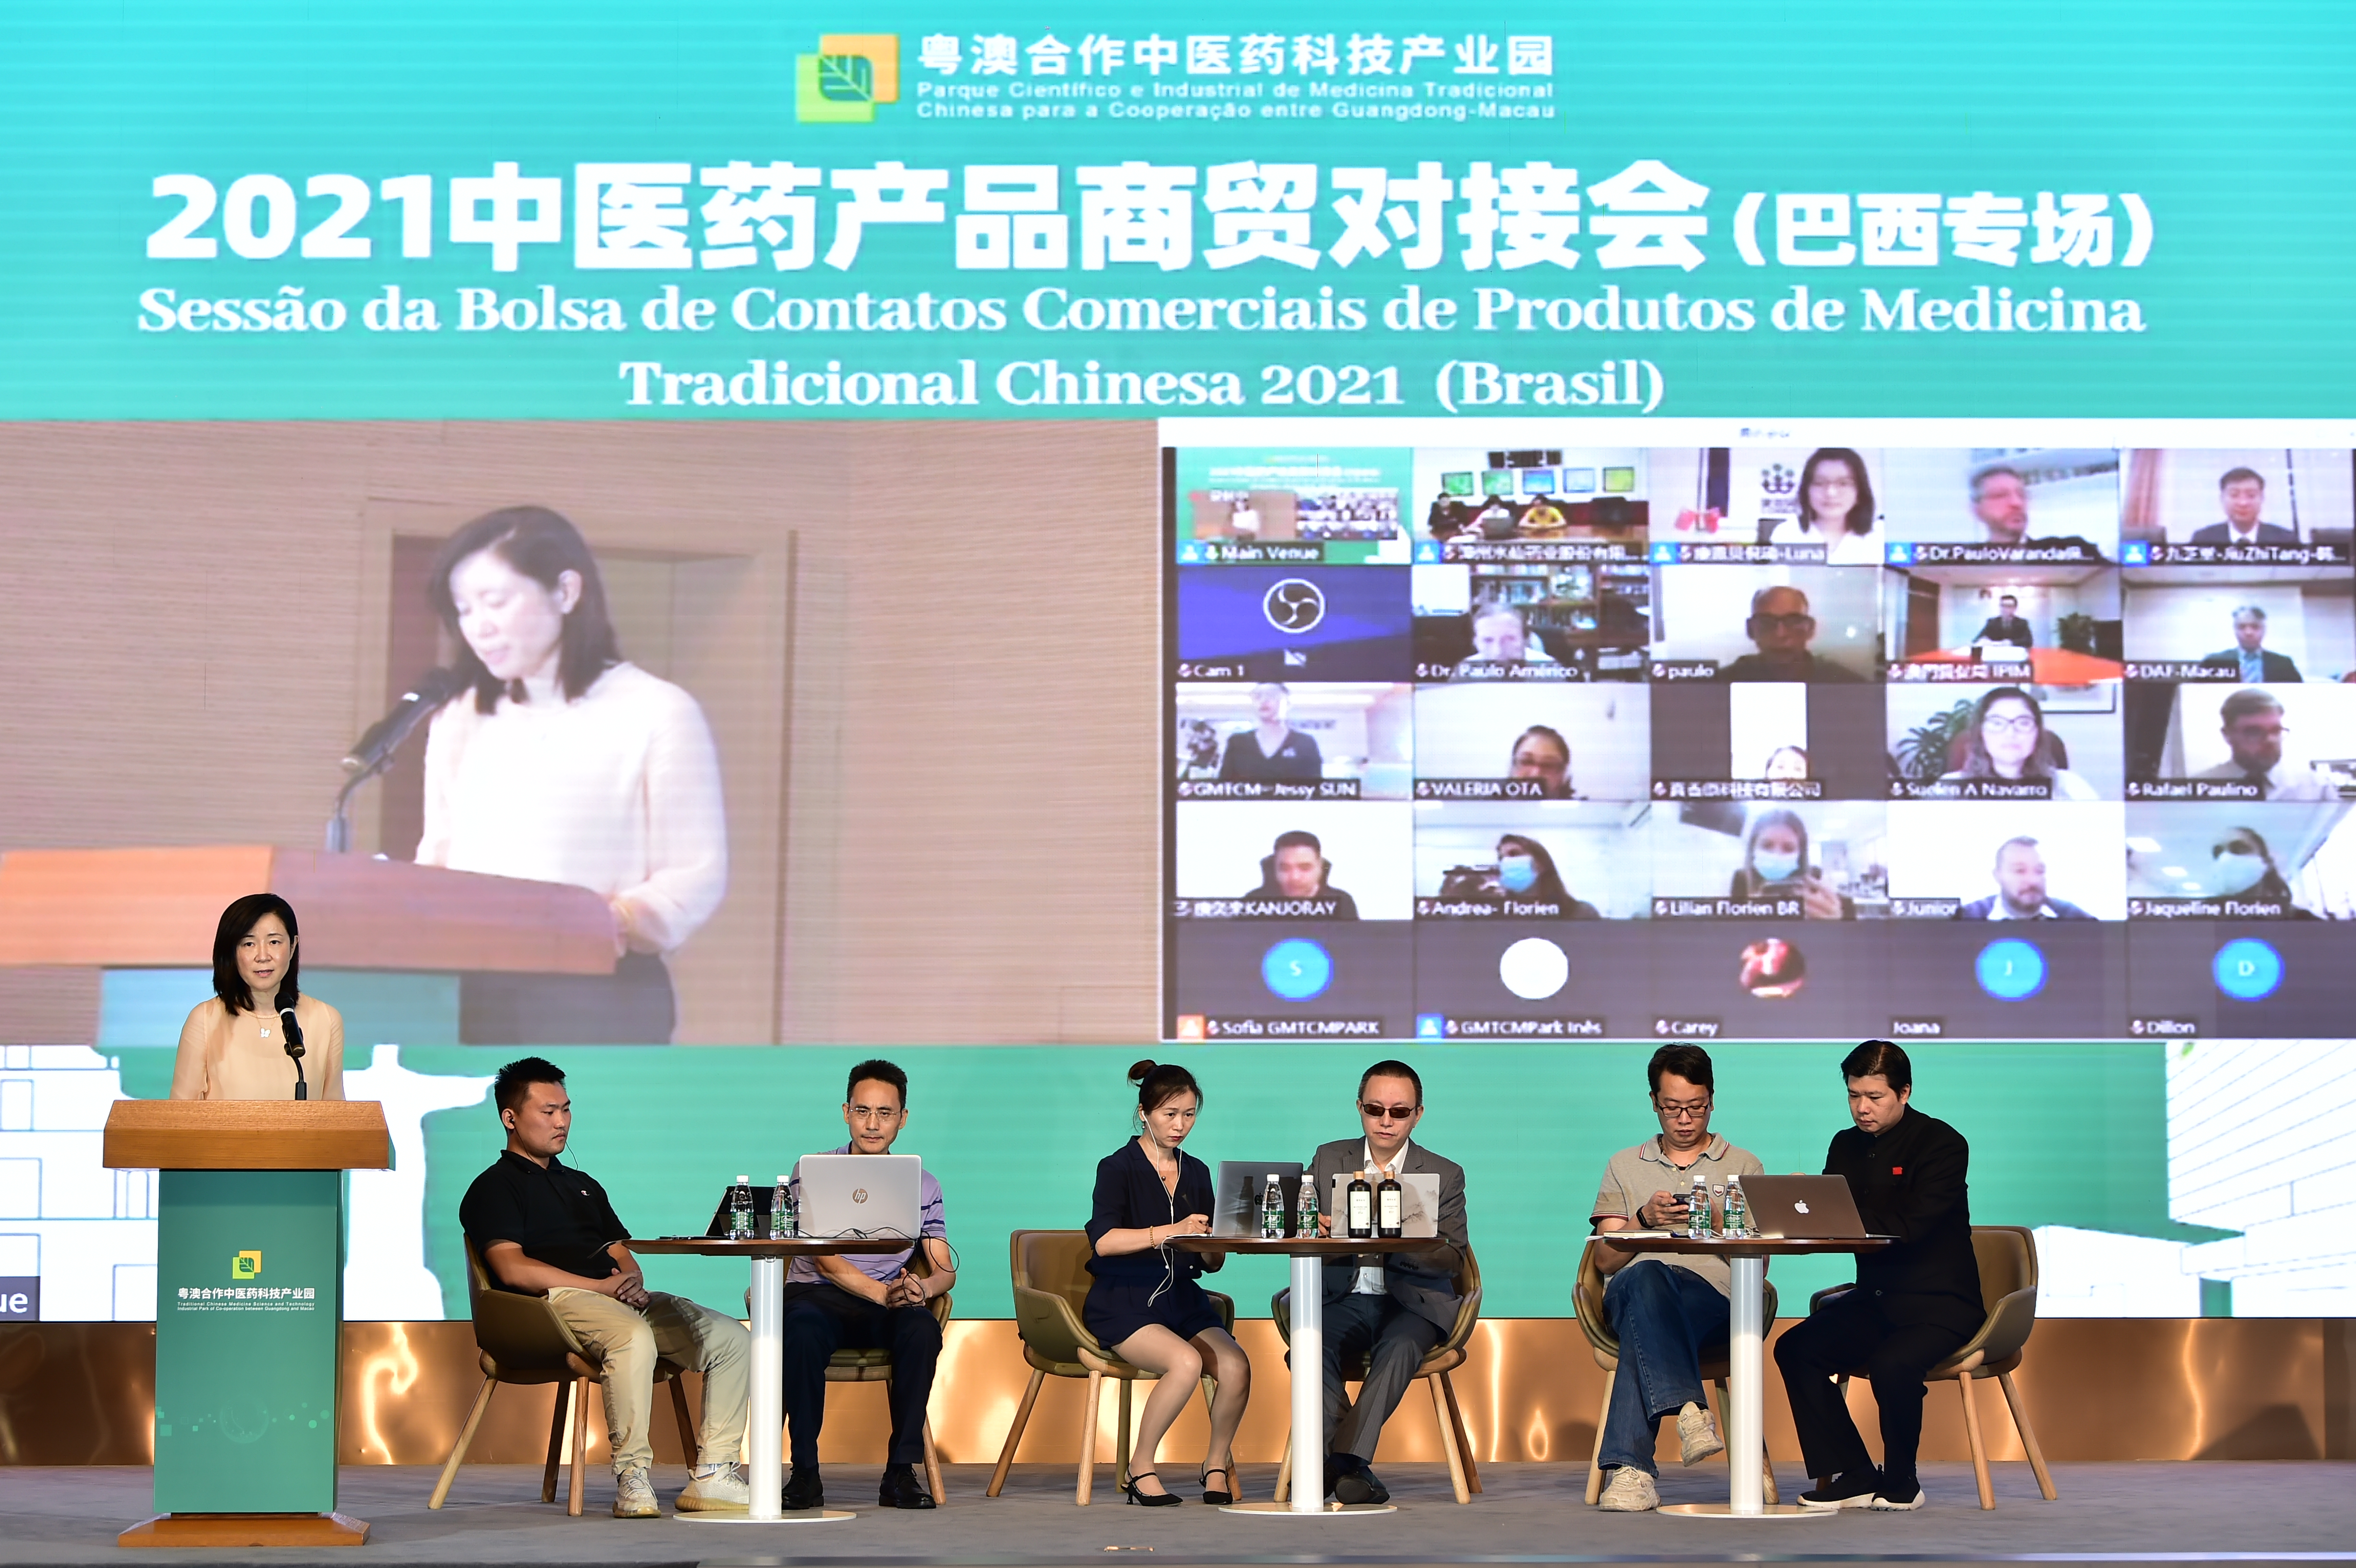 2021 Traditional Chinese Medicine Business Matching Session (Brazil Session)